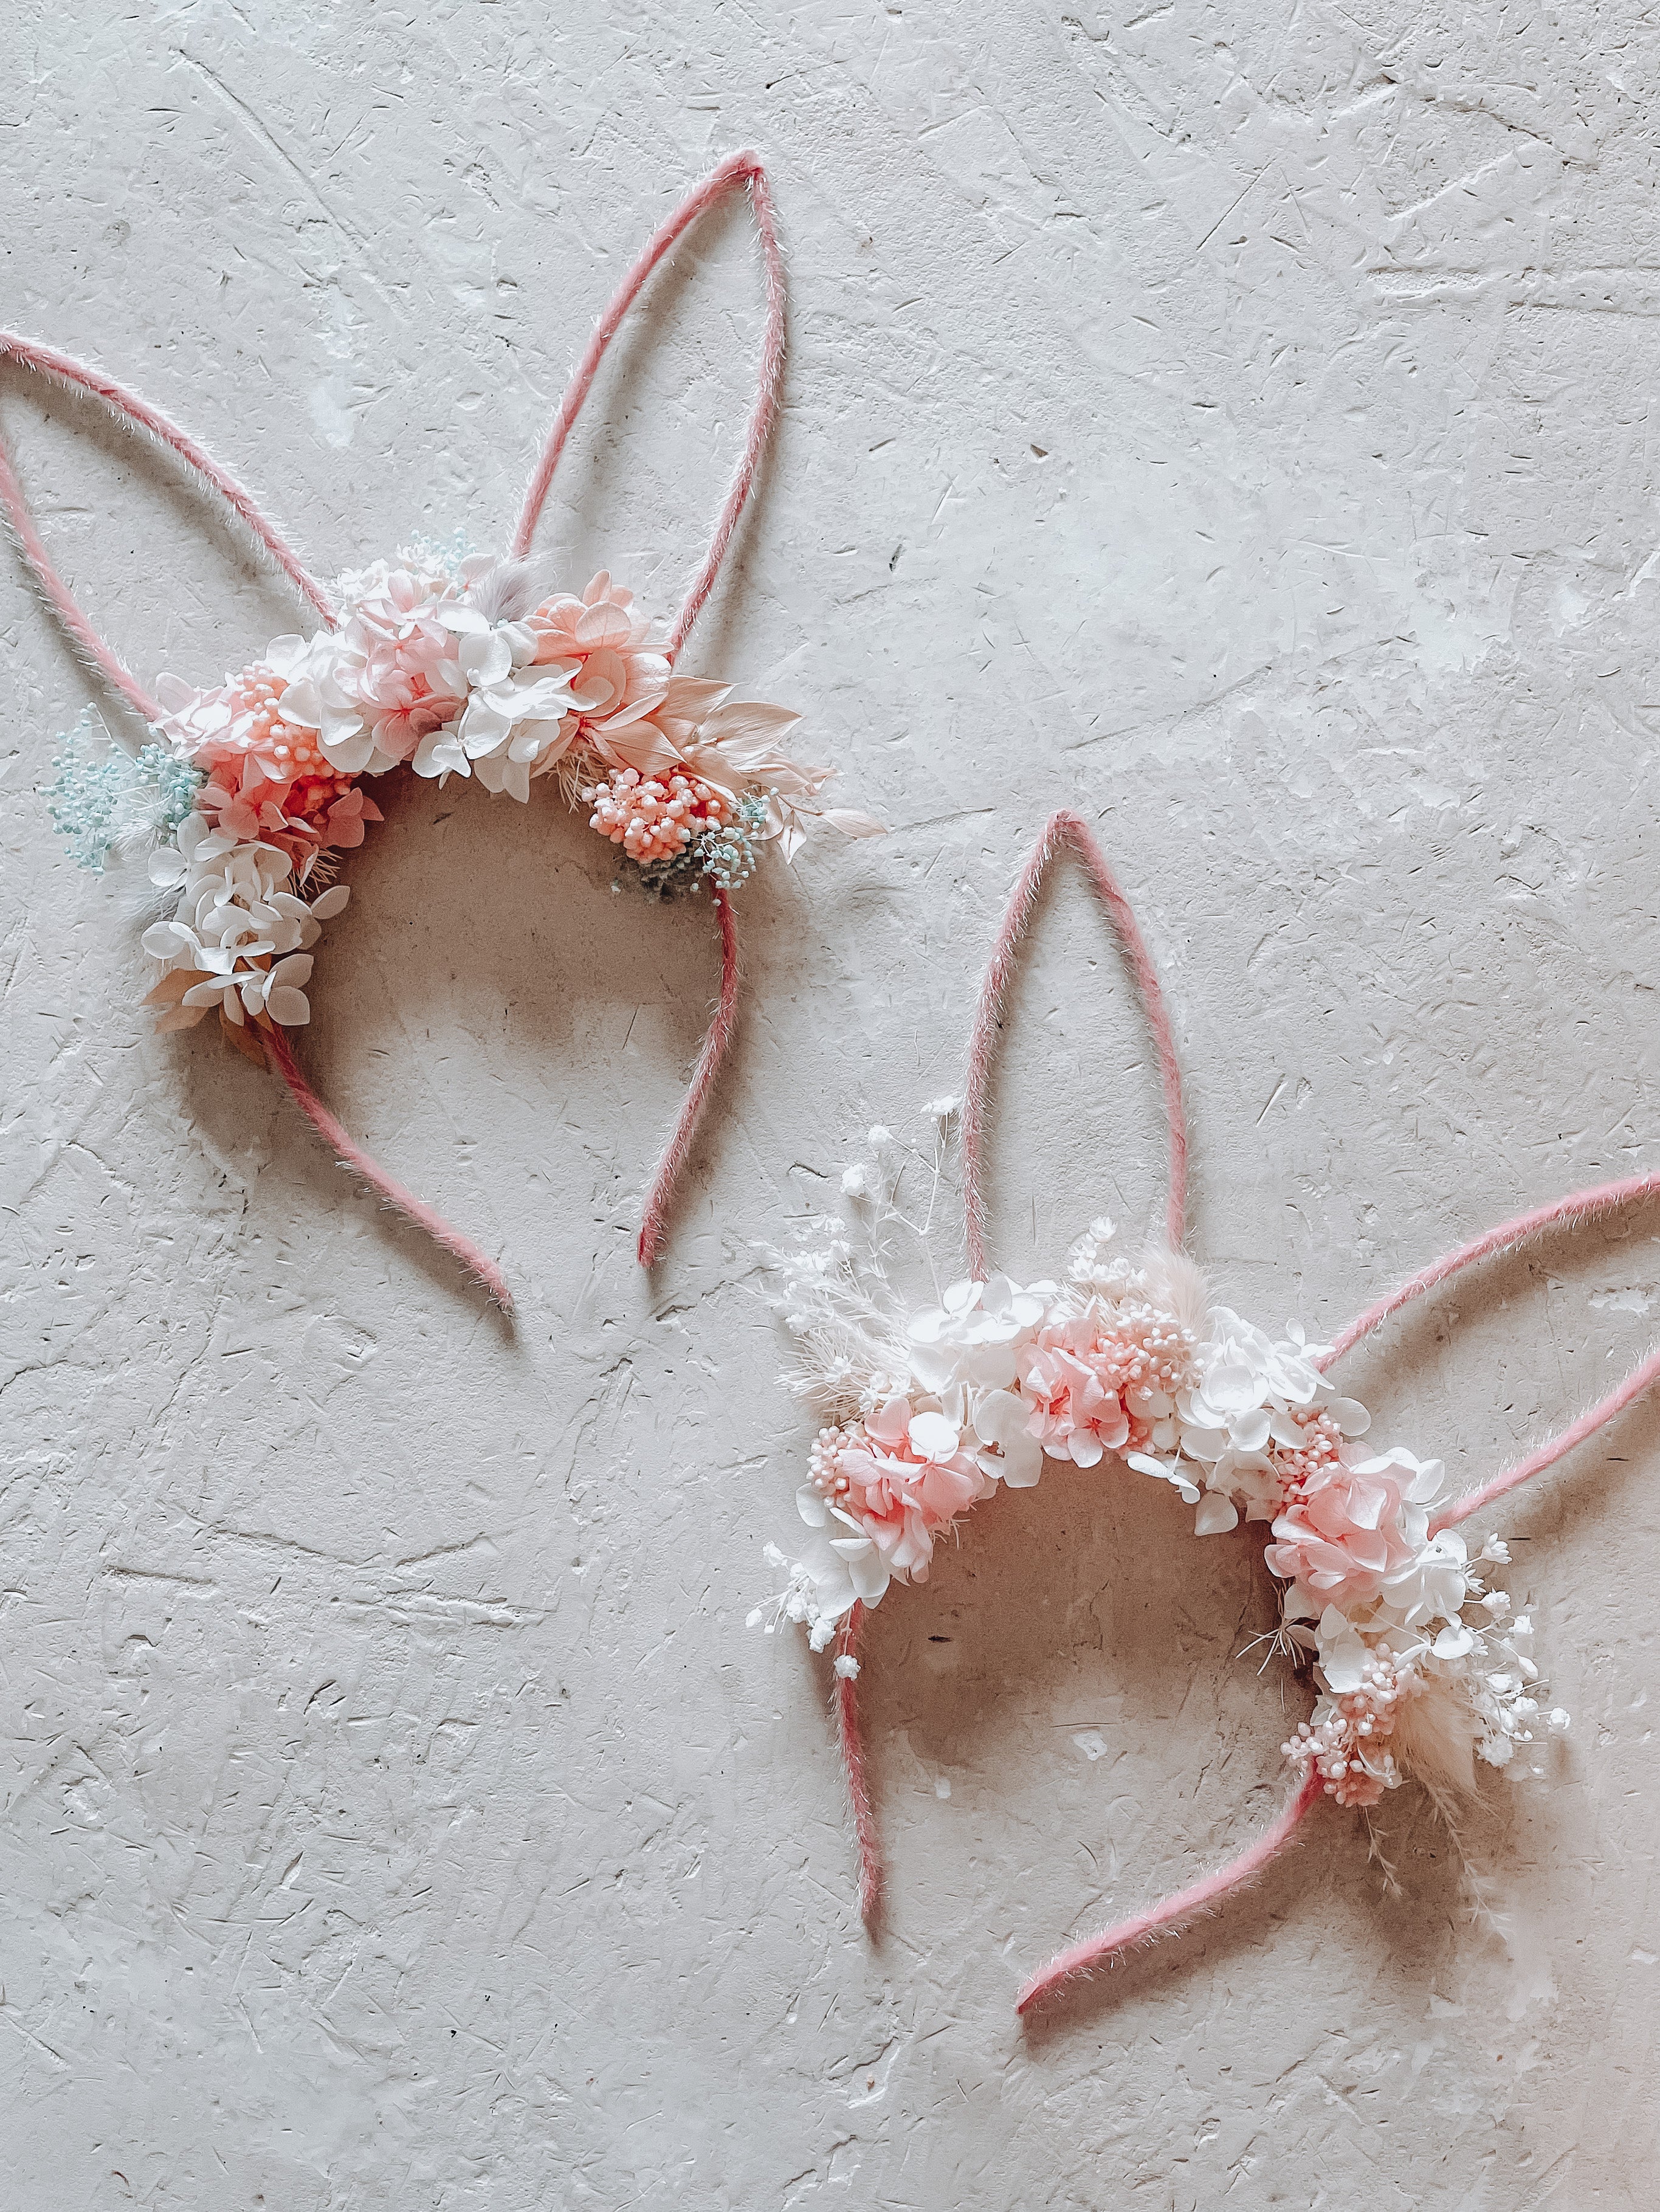 Everlasting bunny crown - PINK wire ears